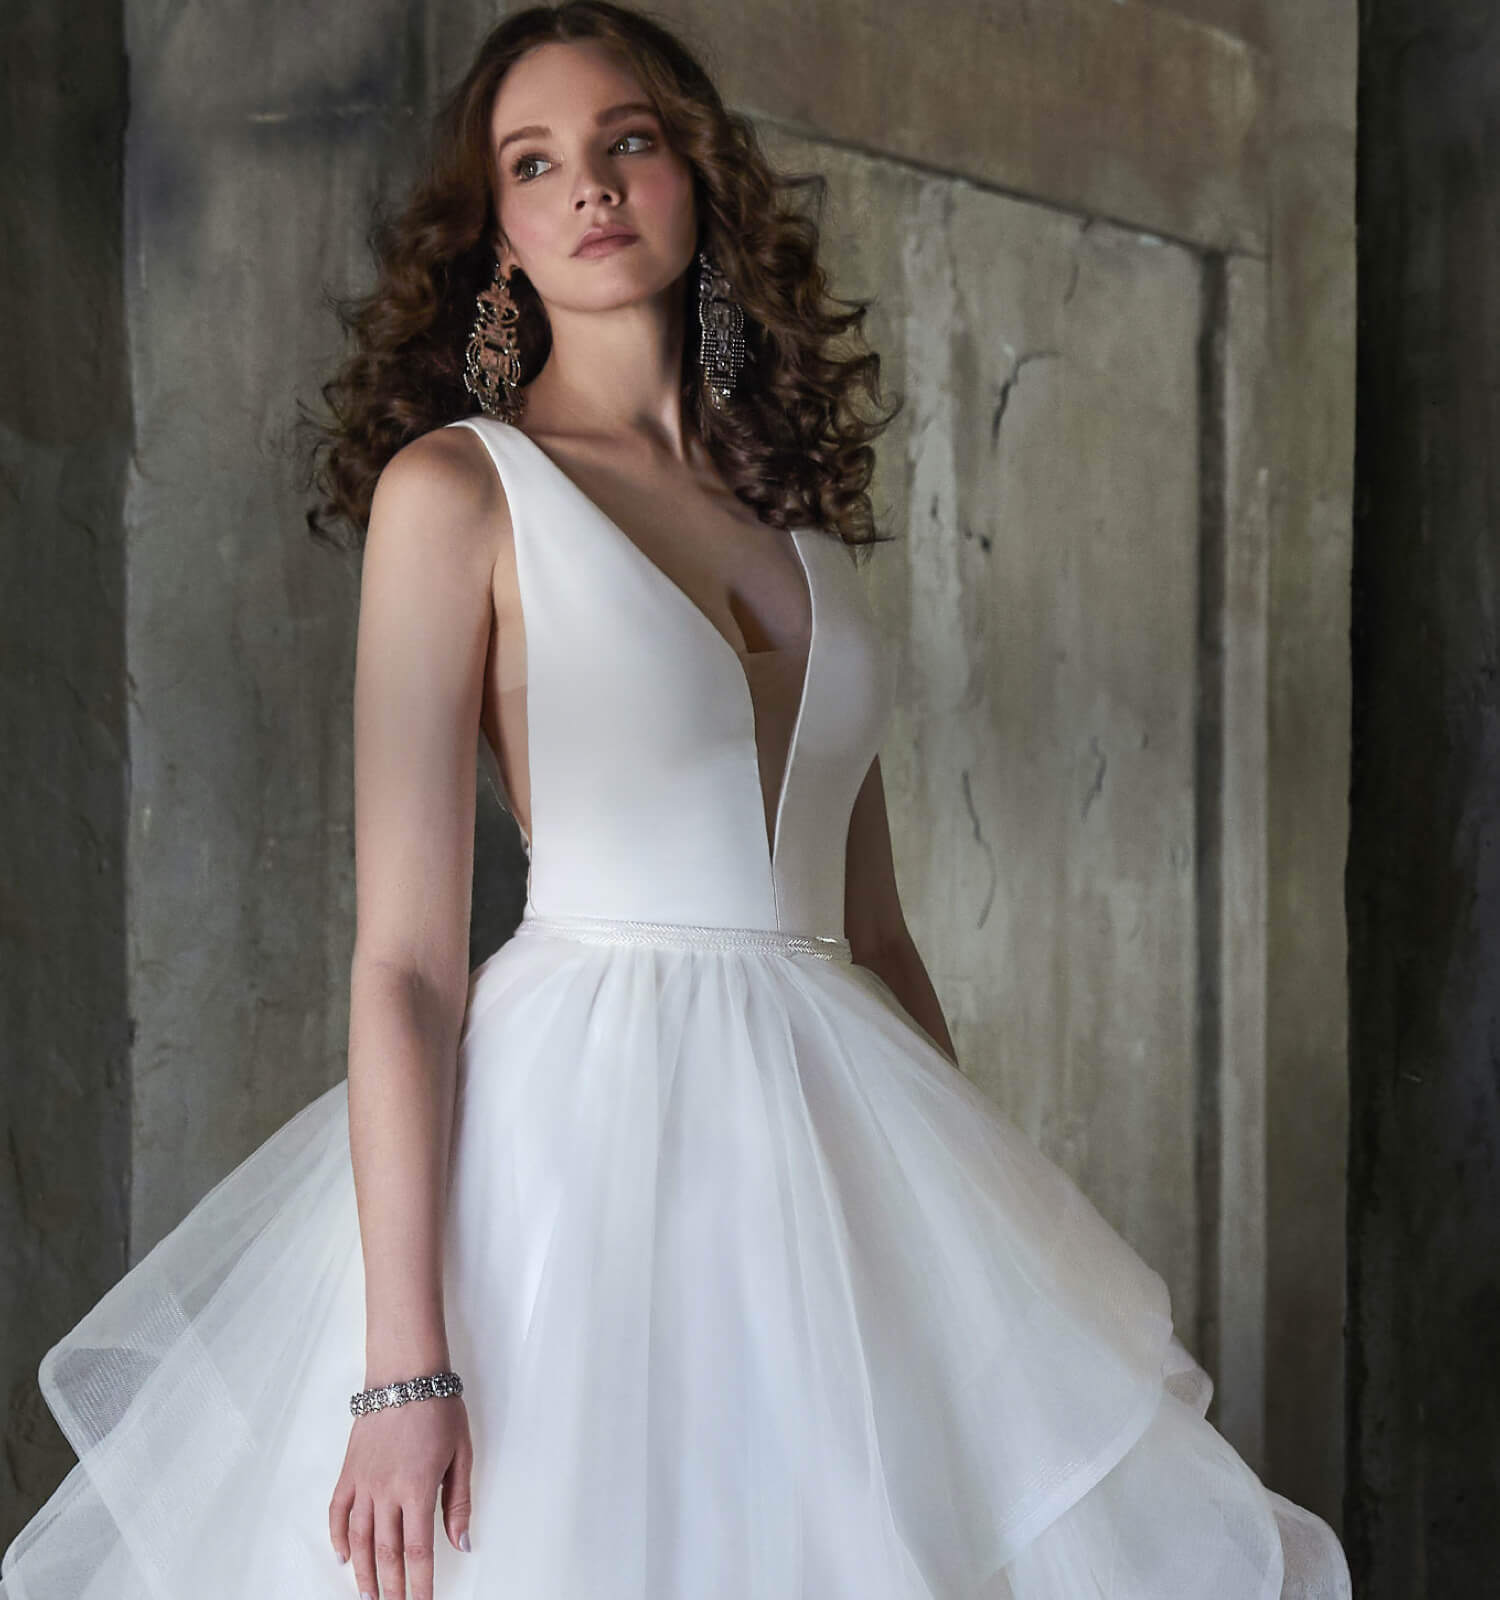 Maggie Sottero collection at Lockhart's Weddings. Mobile image.